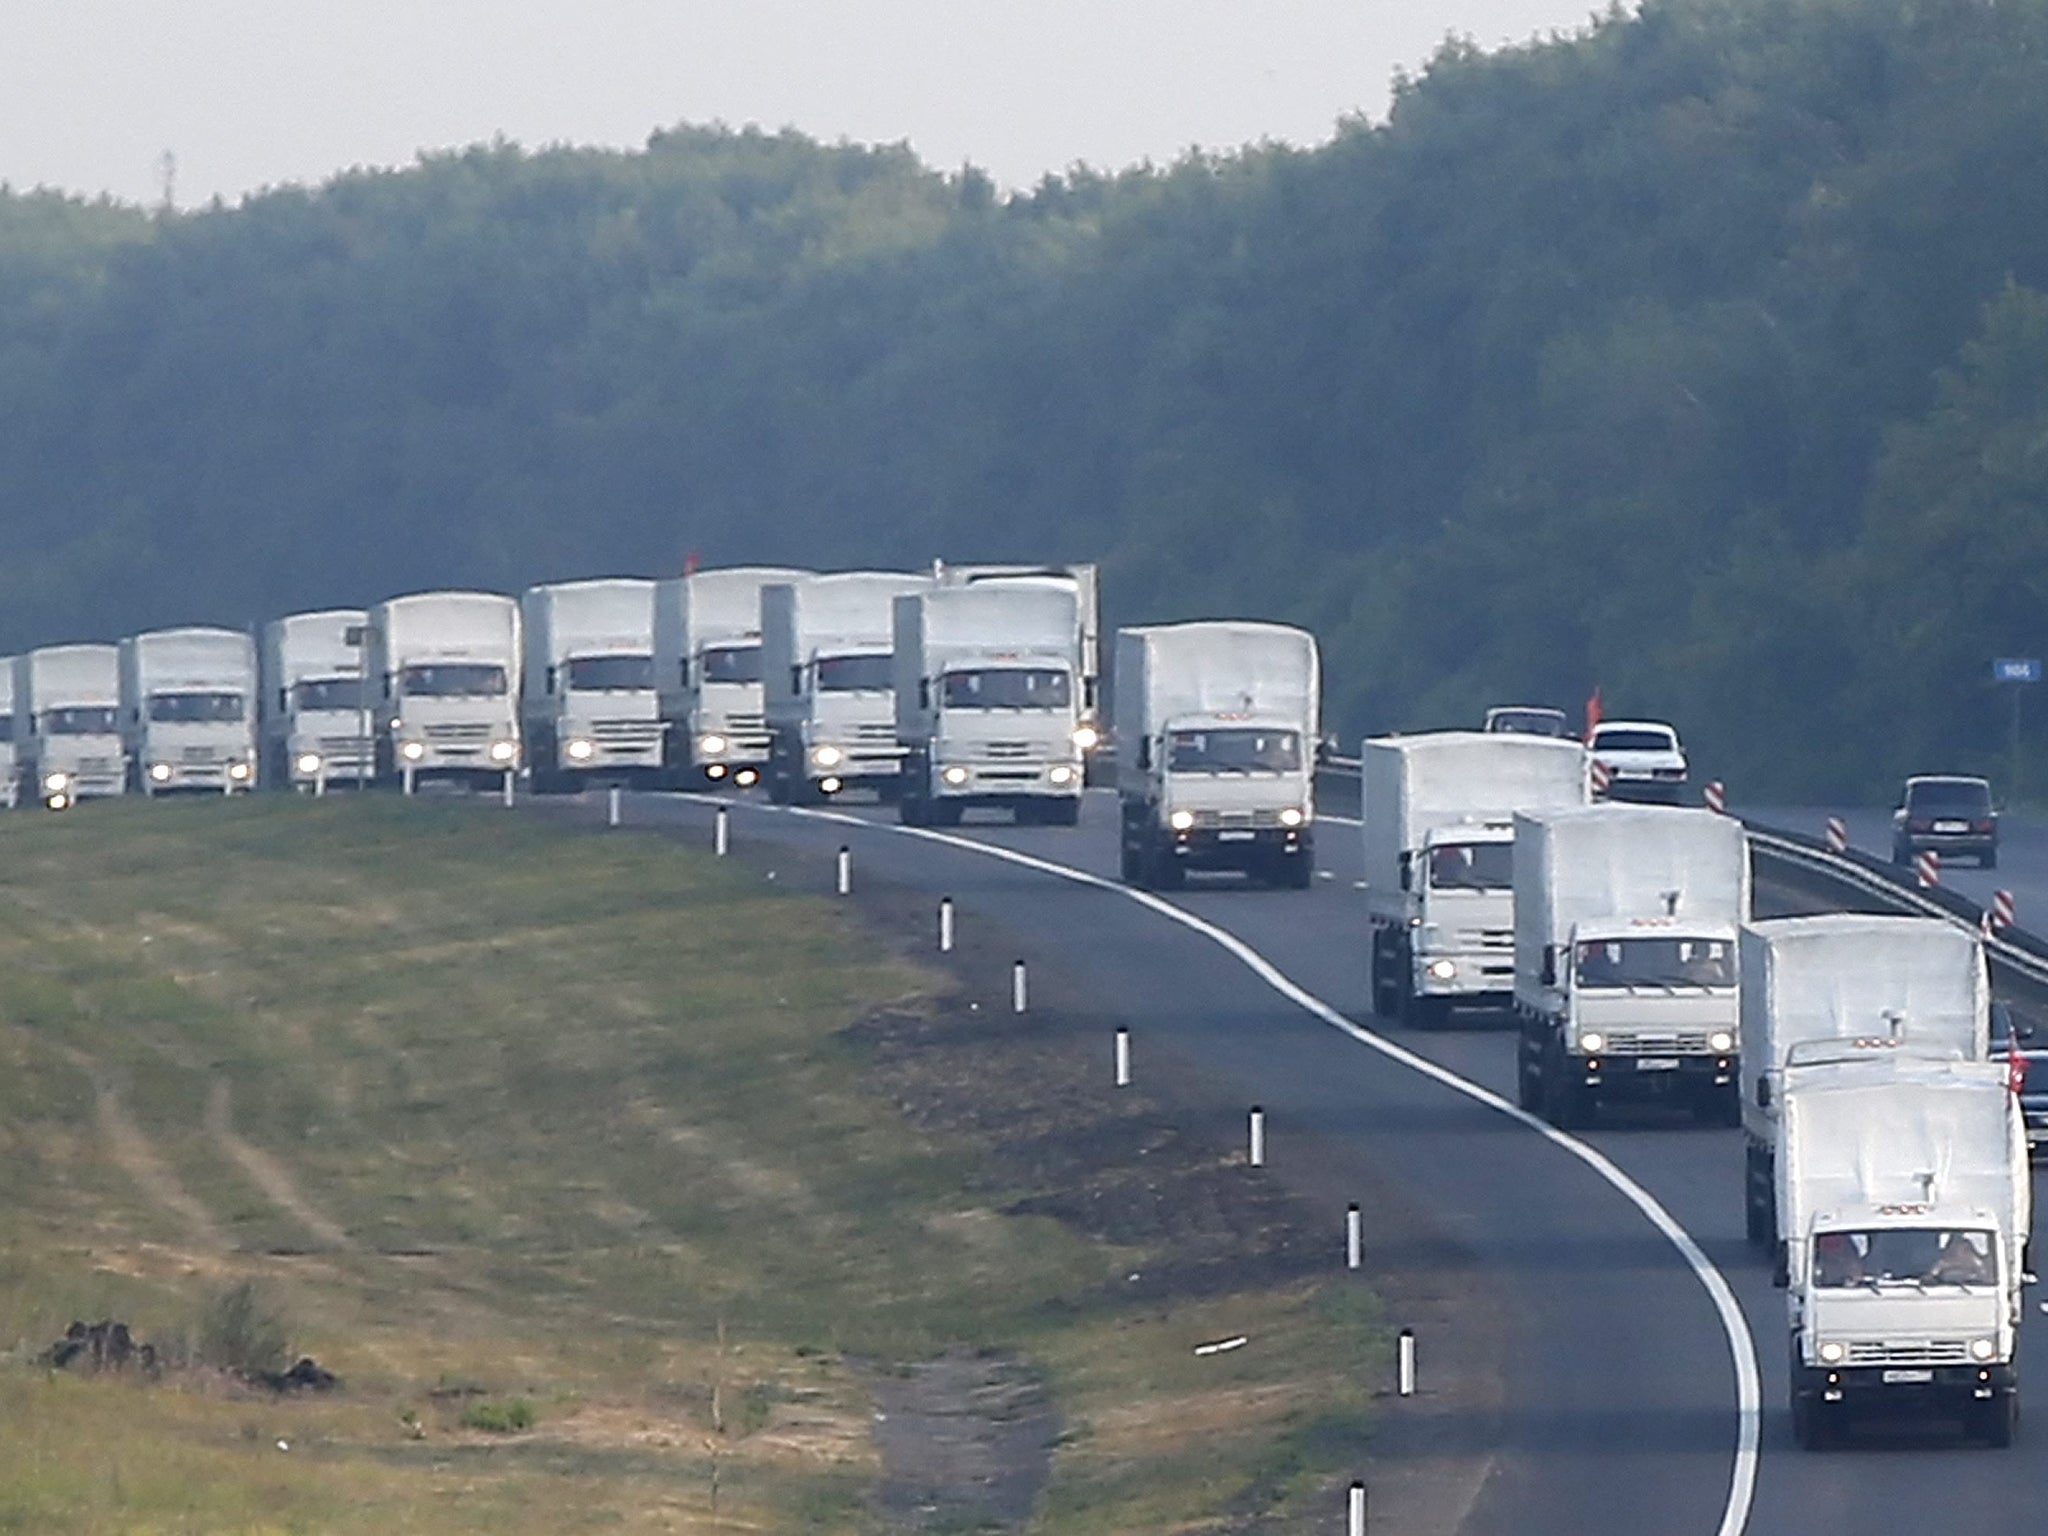 A Russian convoy carrying humanitarian aid for residents in rebel eastern Ukrainian regions moves along a road about 50 km from Voronezh, Russia, 14 August 2014. The convoy continues to advance through Russian territory after a one-day stop in Voronezh in